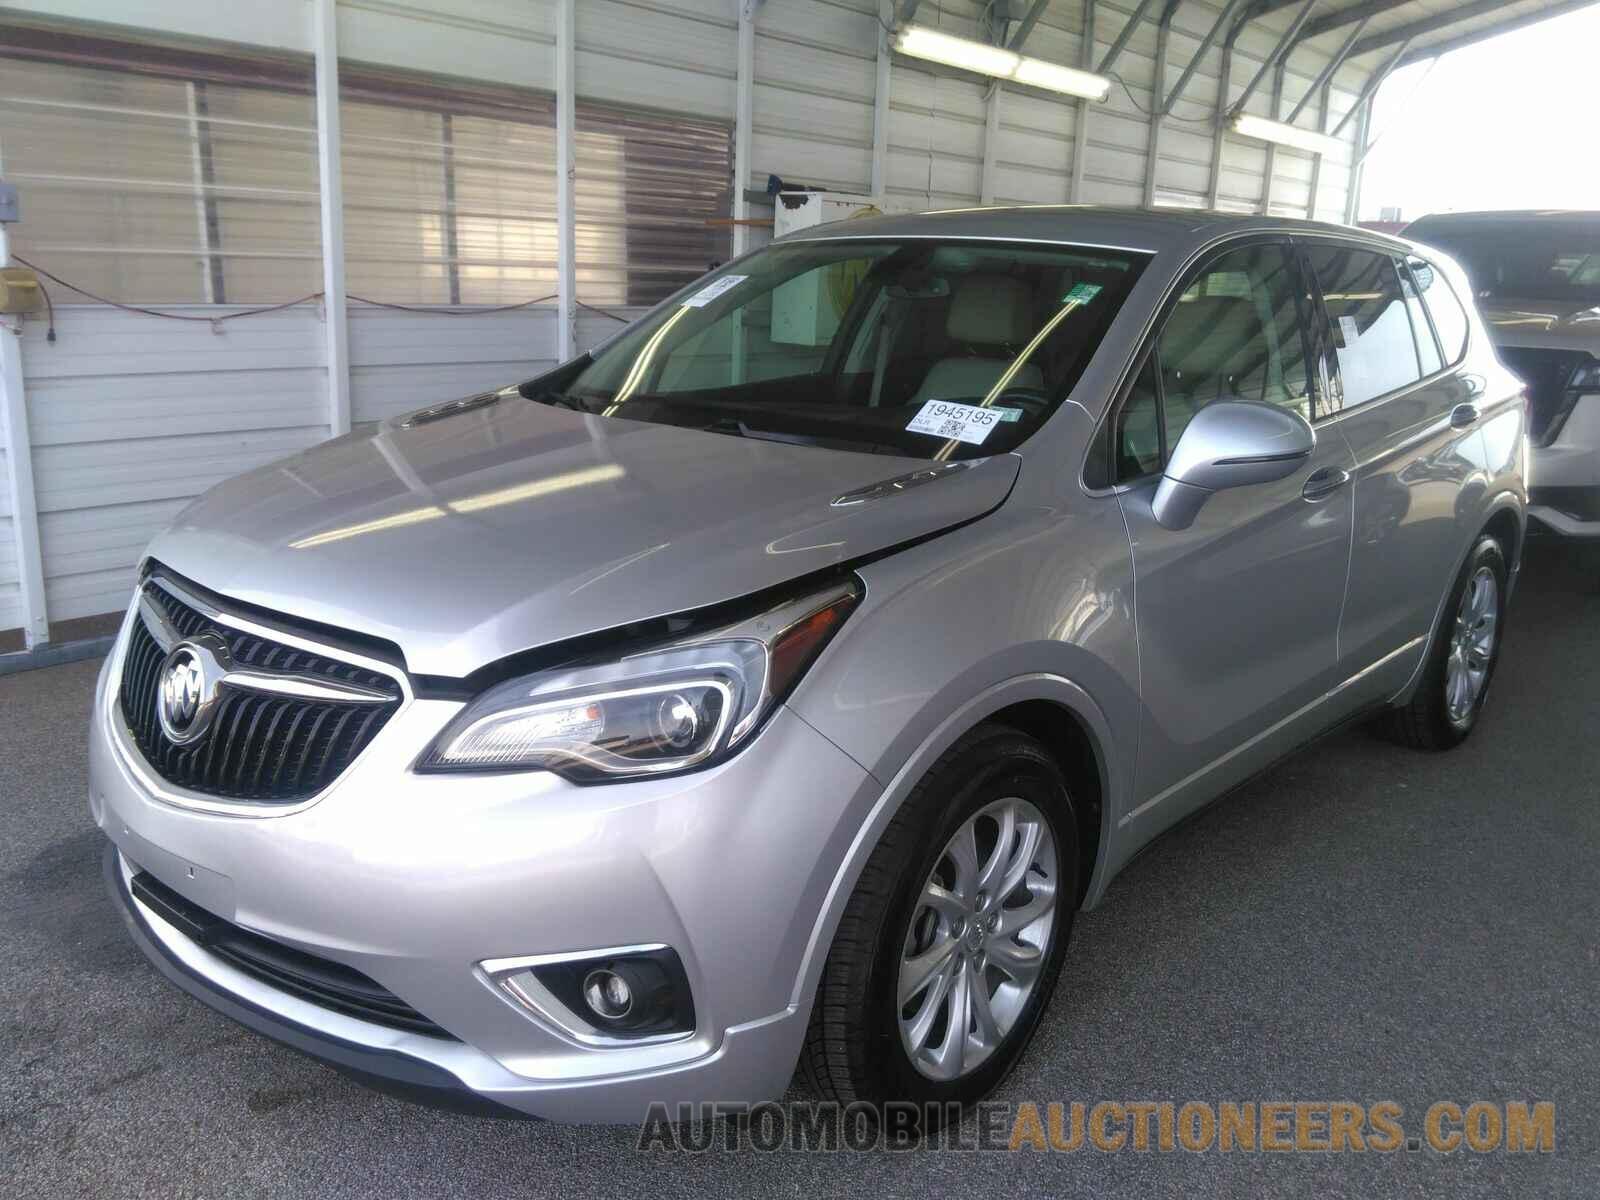 LRBFXBSA8KD107511 Buick Envision 2019